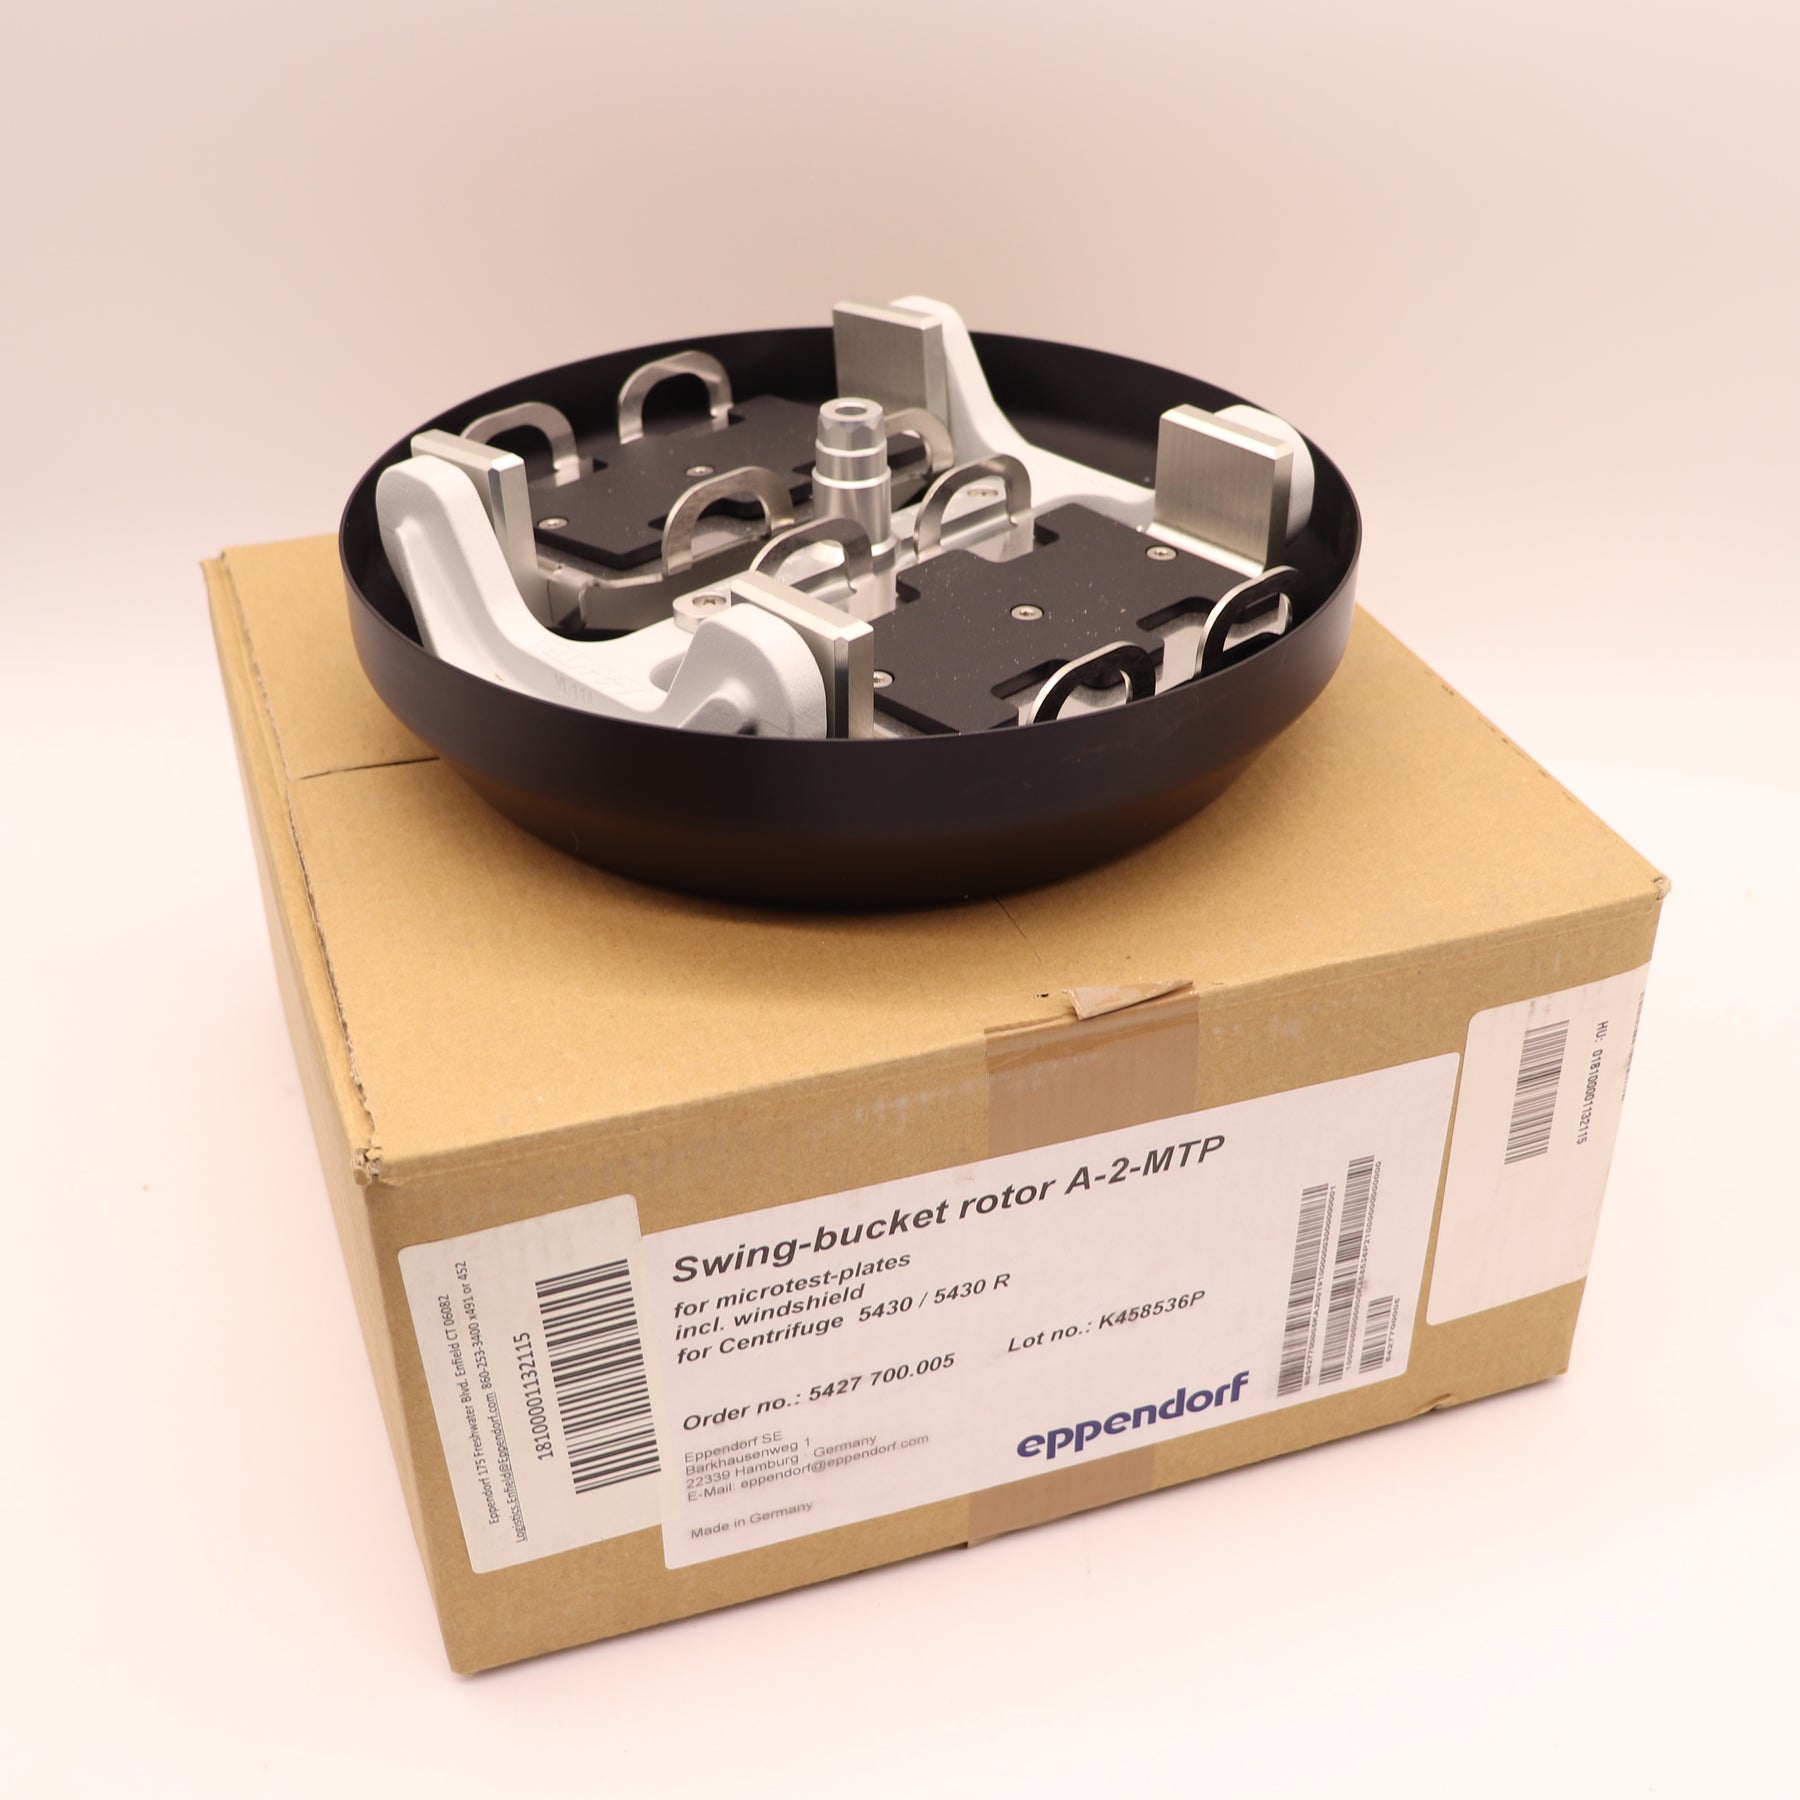 Eppendorf 5430 5430R Centrifuge Swing Bucket Rotor A-2-MTP